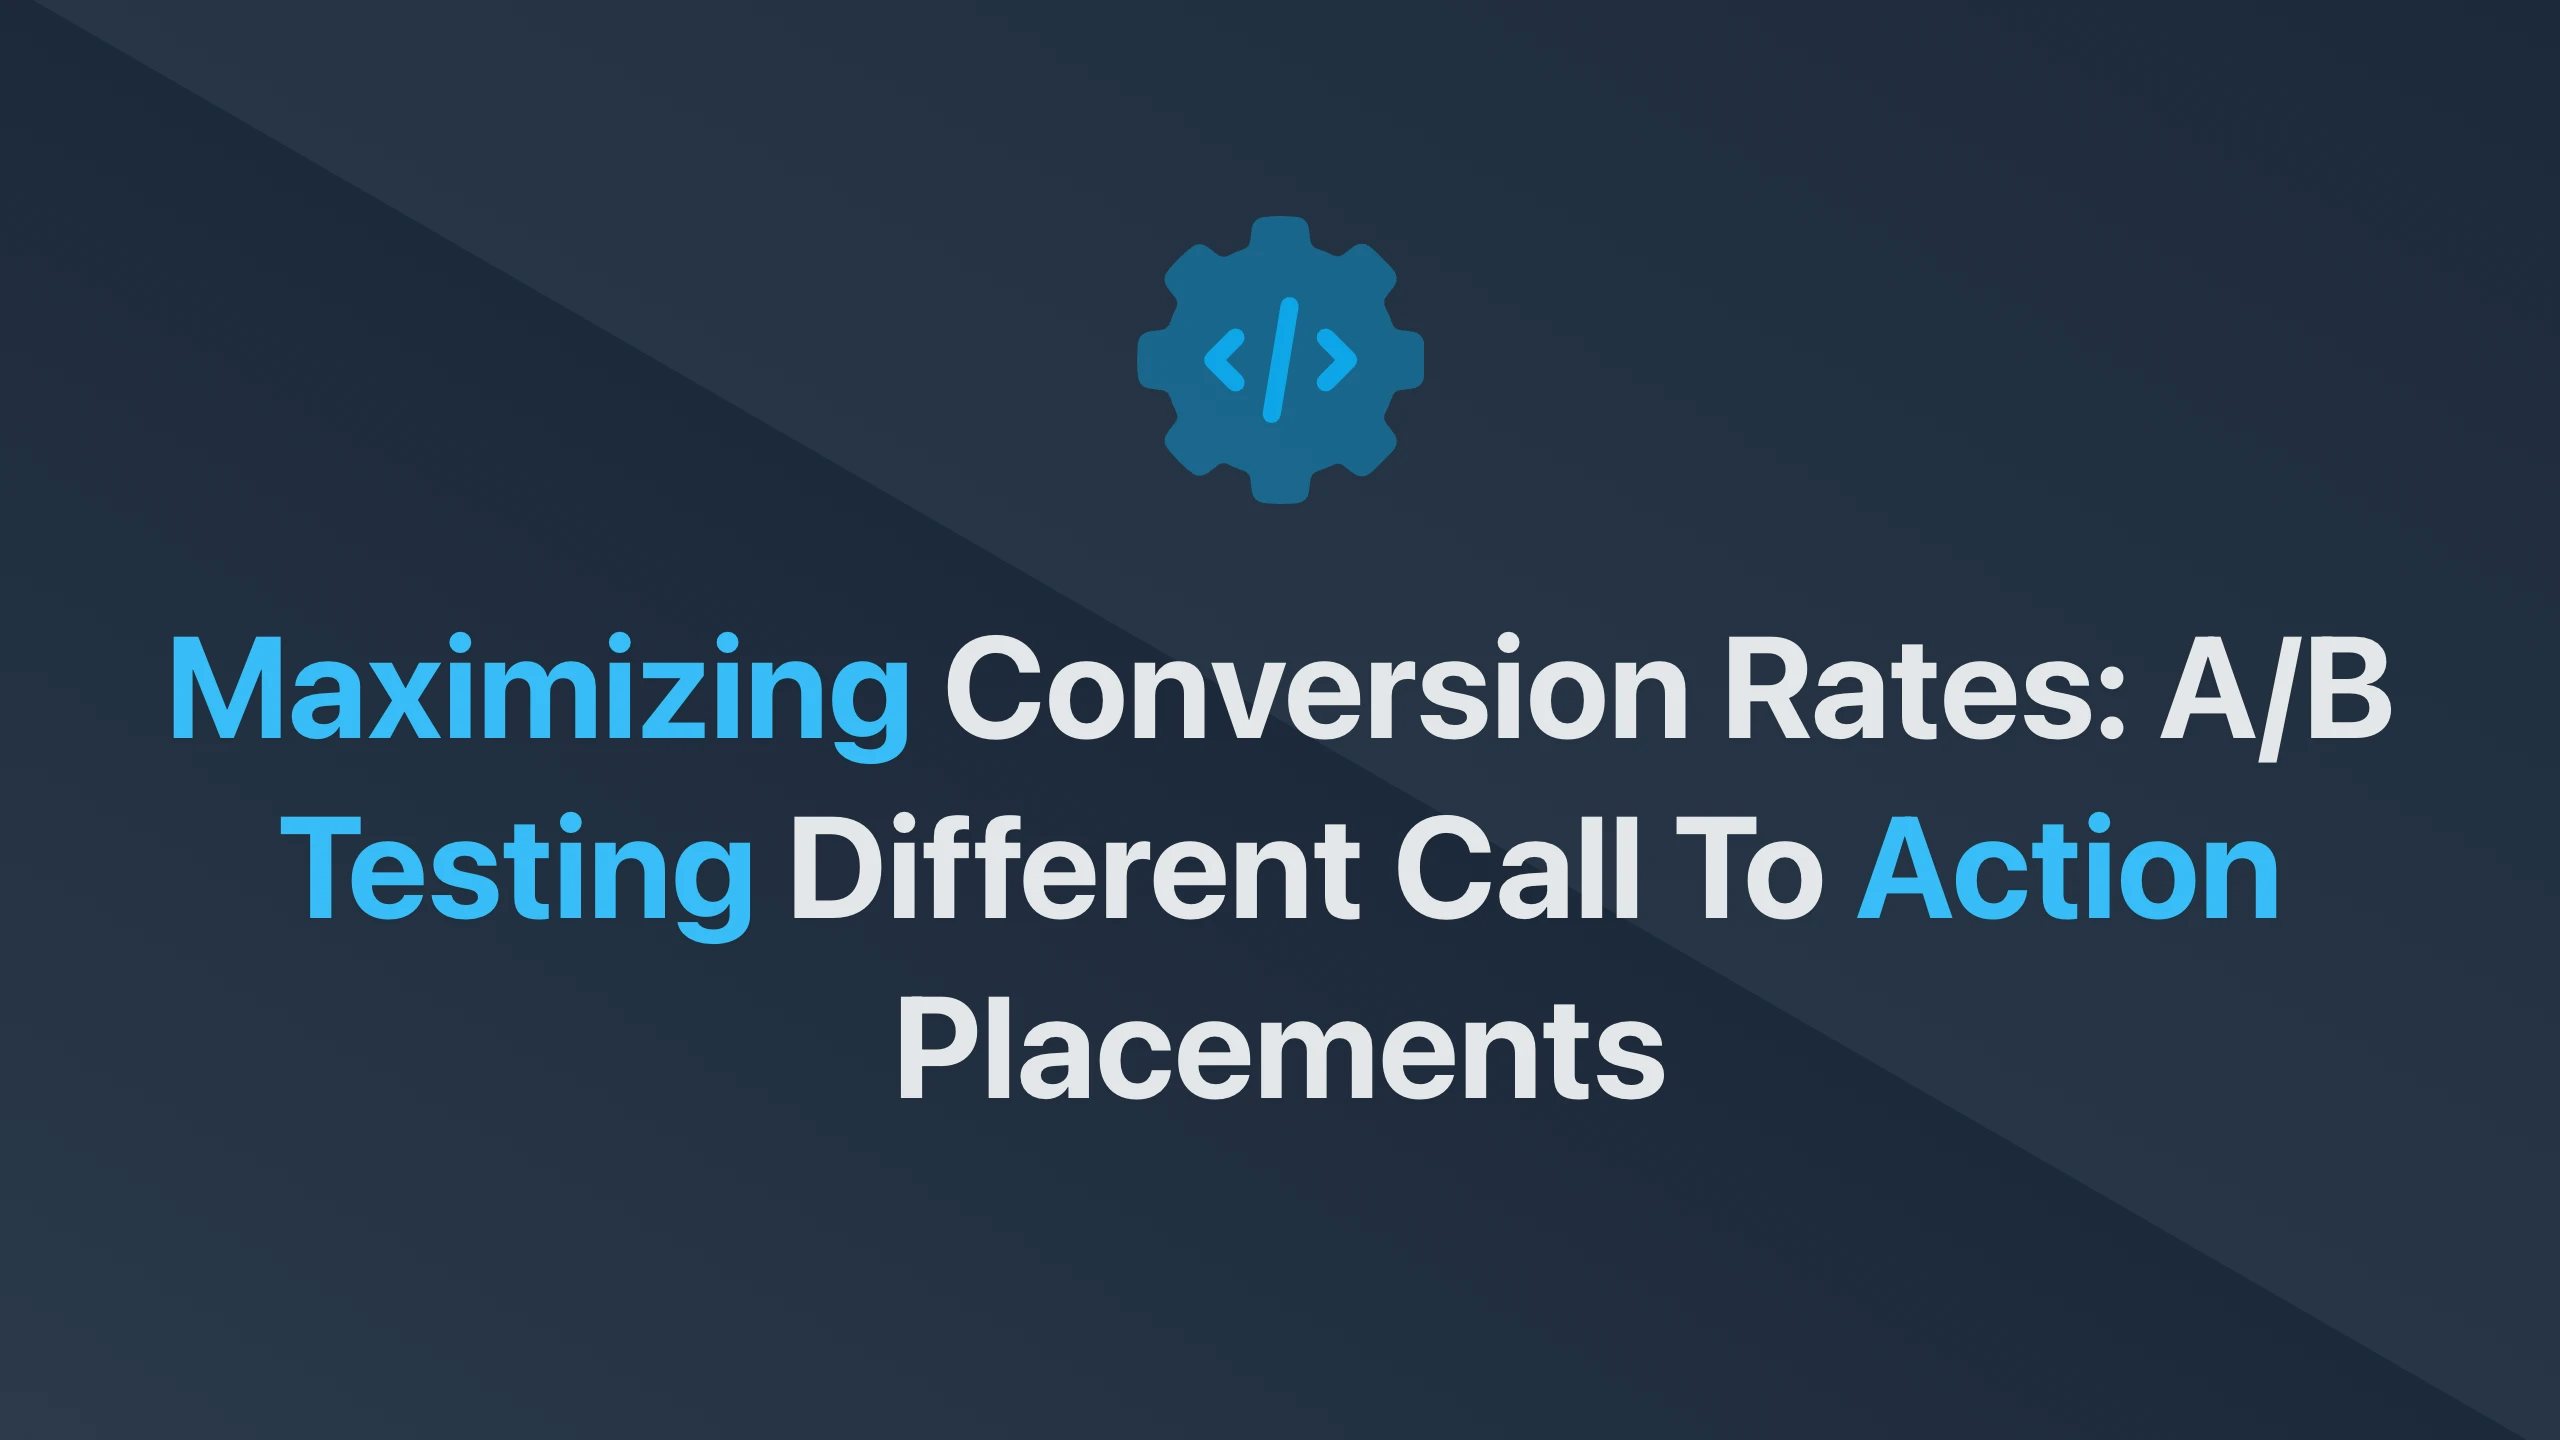 Cover Image for Maximizing Conversion Rates: A/B Testing Different Call to Action Placements